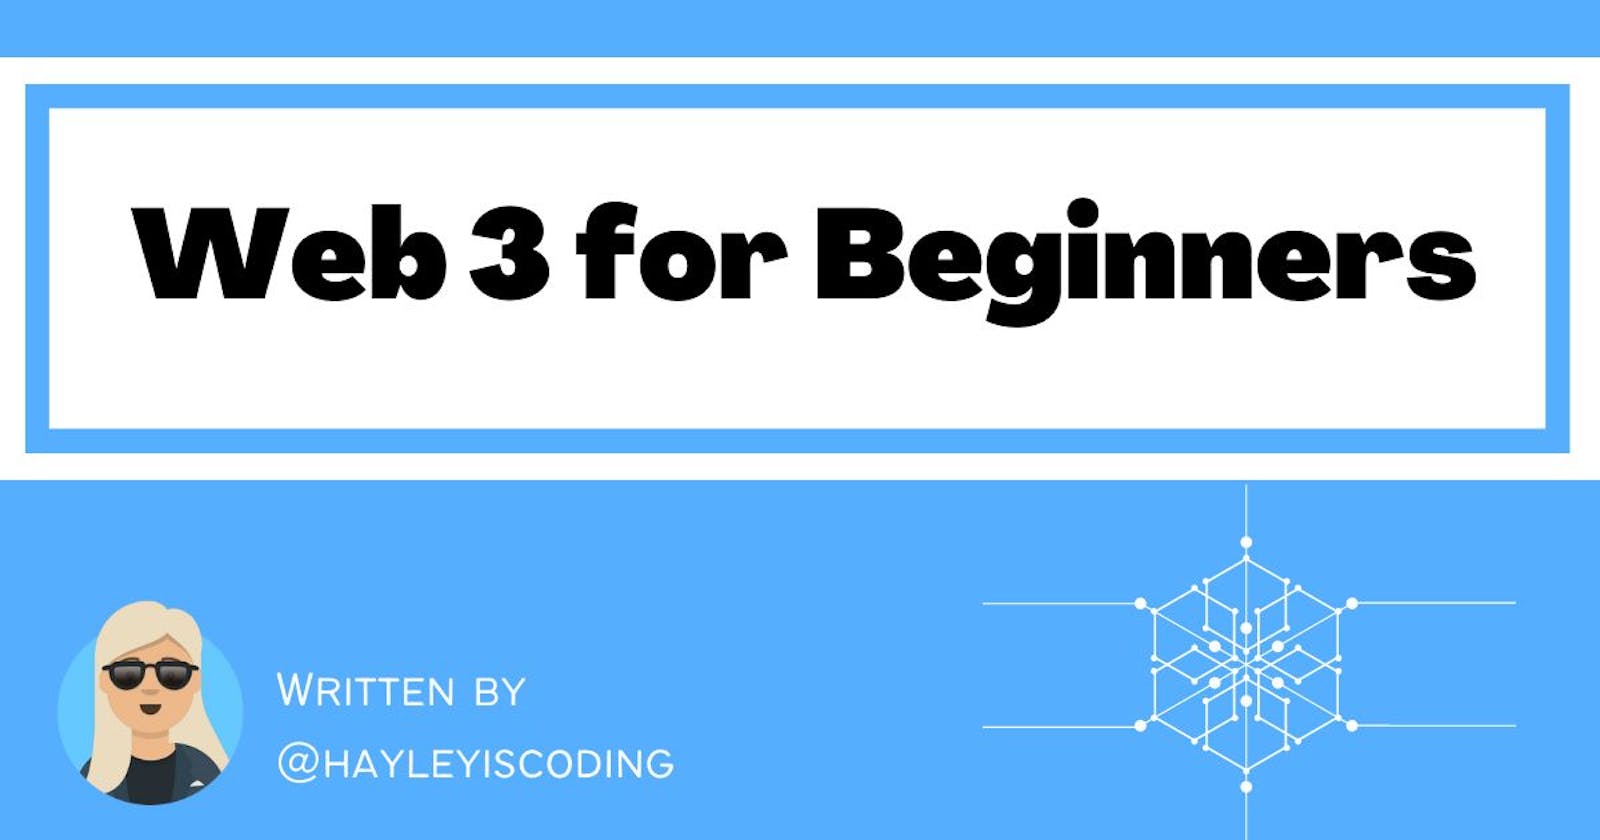 Web 3 for Beginners